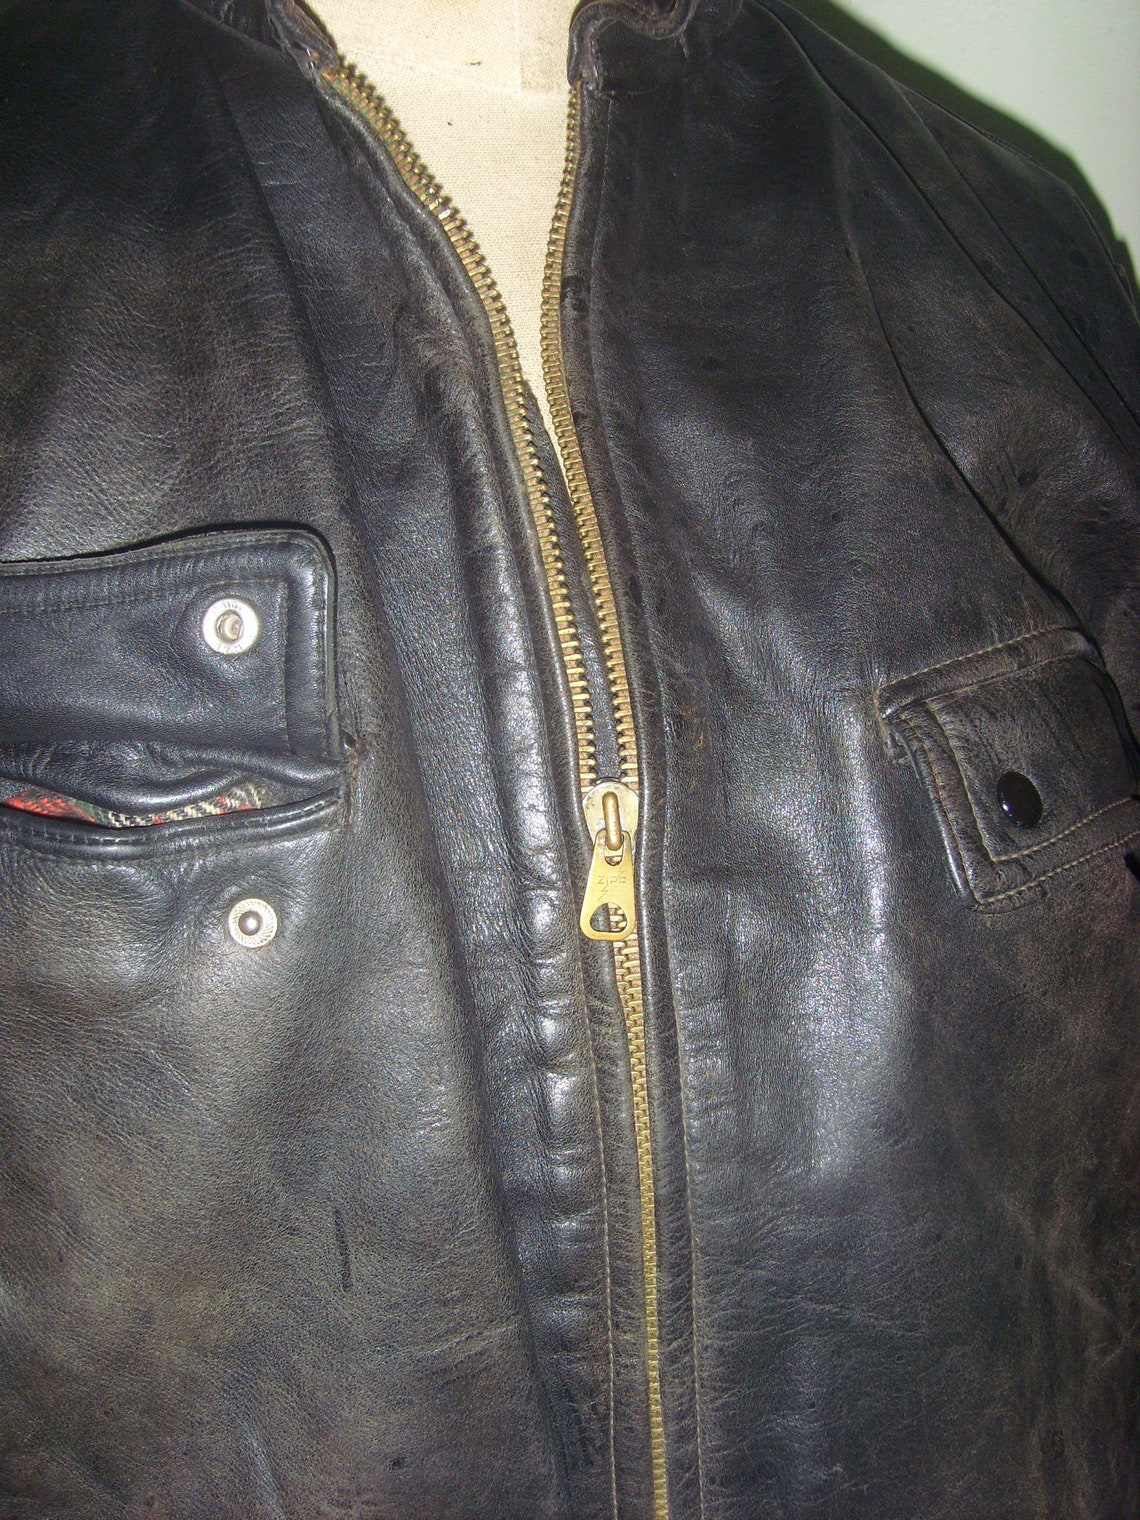 40's German Black Flying Leather Jacket Made in Germany - Etsy